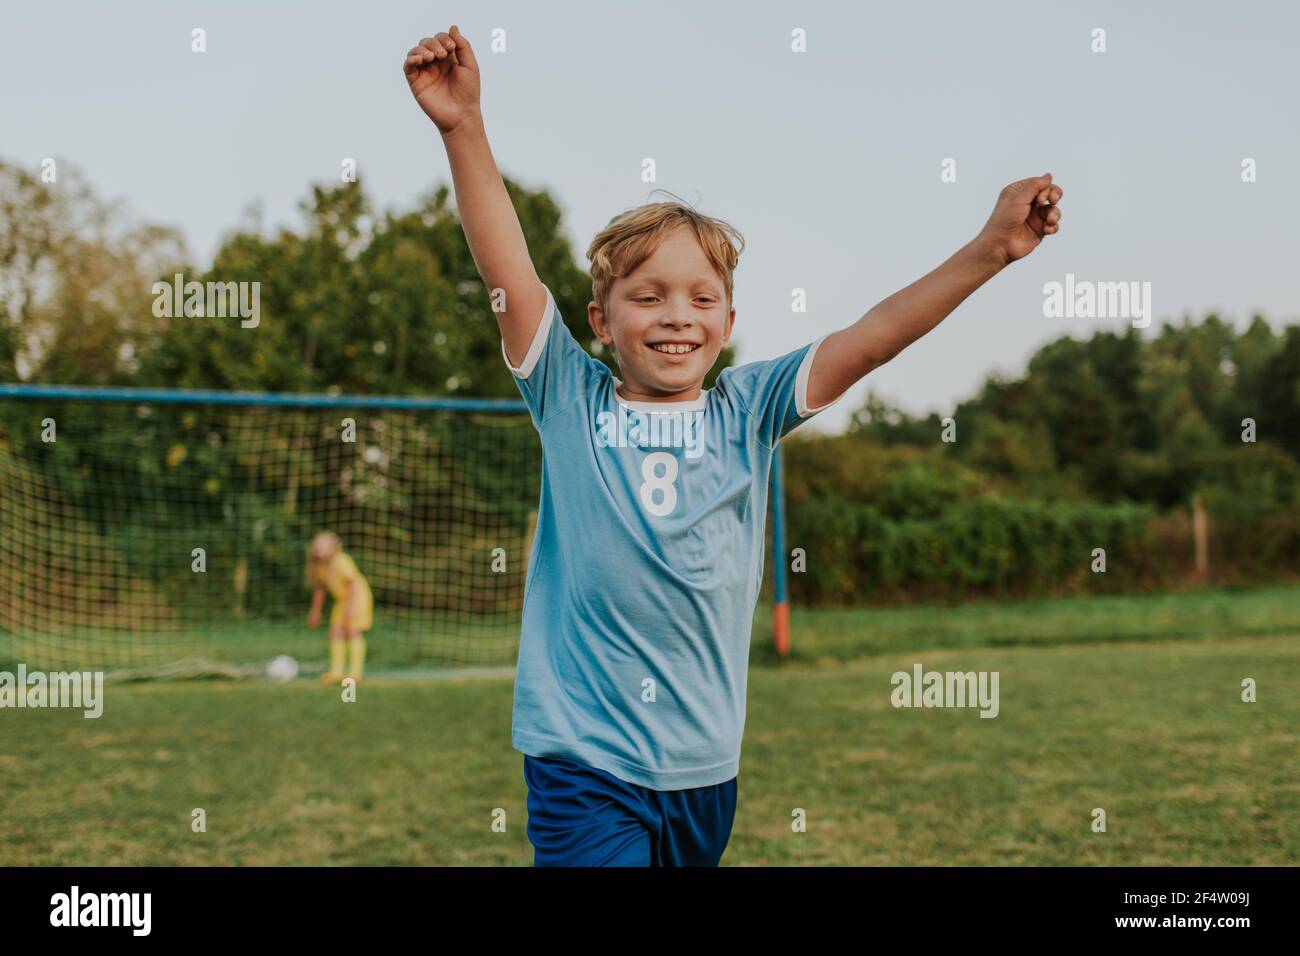 Children playing football outside on pitch. Happy young boy scoring goal during amateur soccer game. Stock Photo